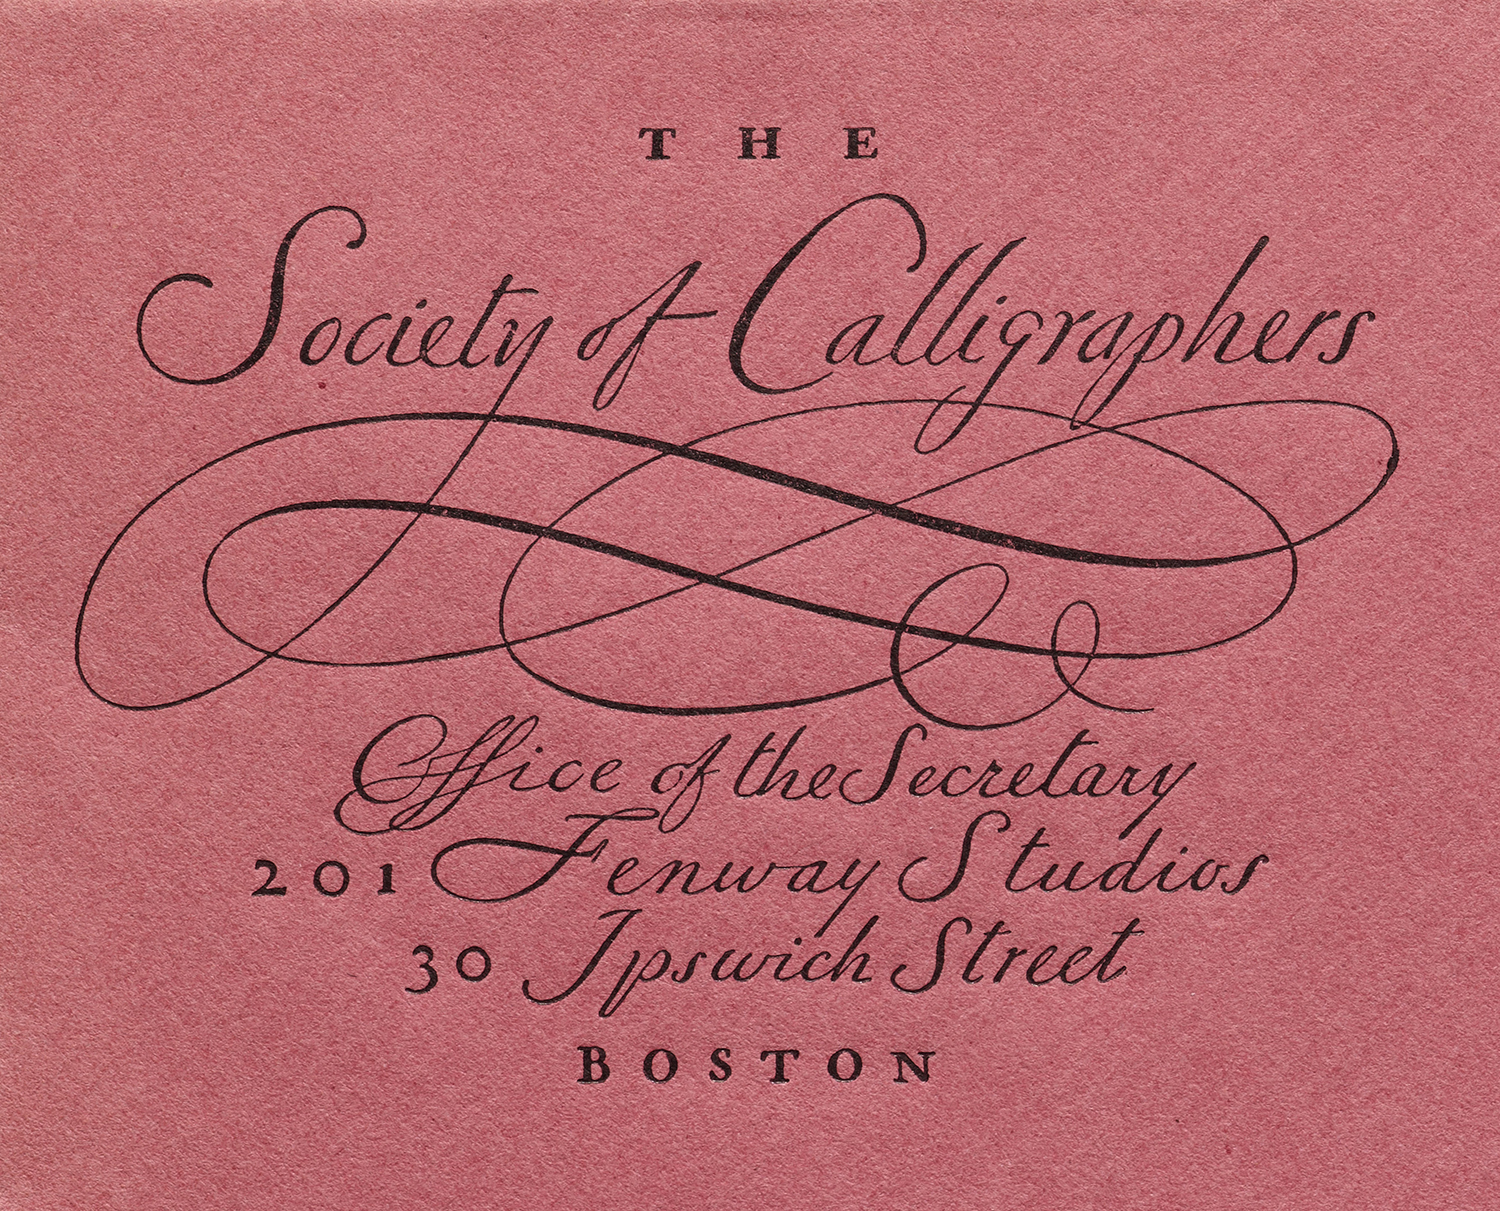  Detail of stationery for the Society of Calligraphers, ca. 1922. Collection of Letterform Archive. 